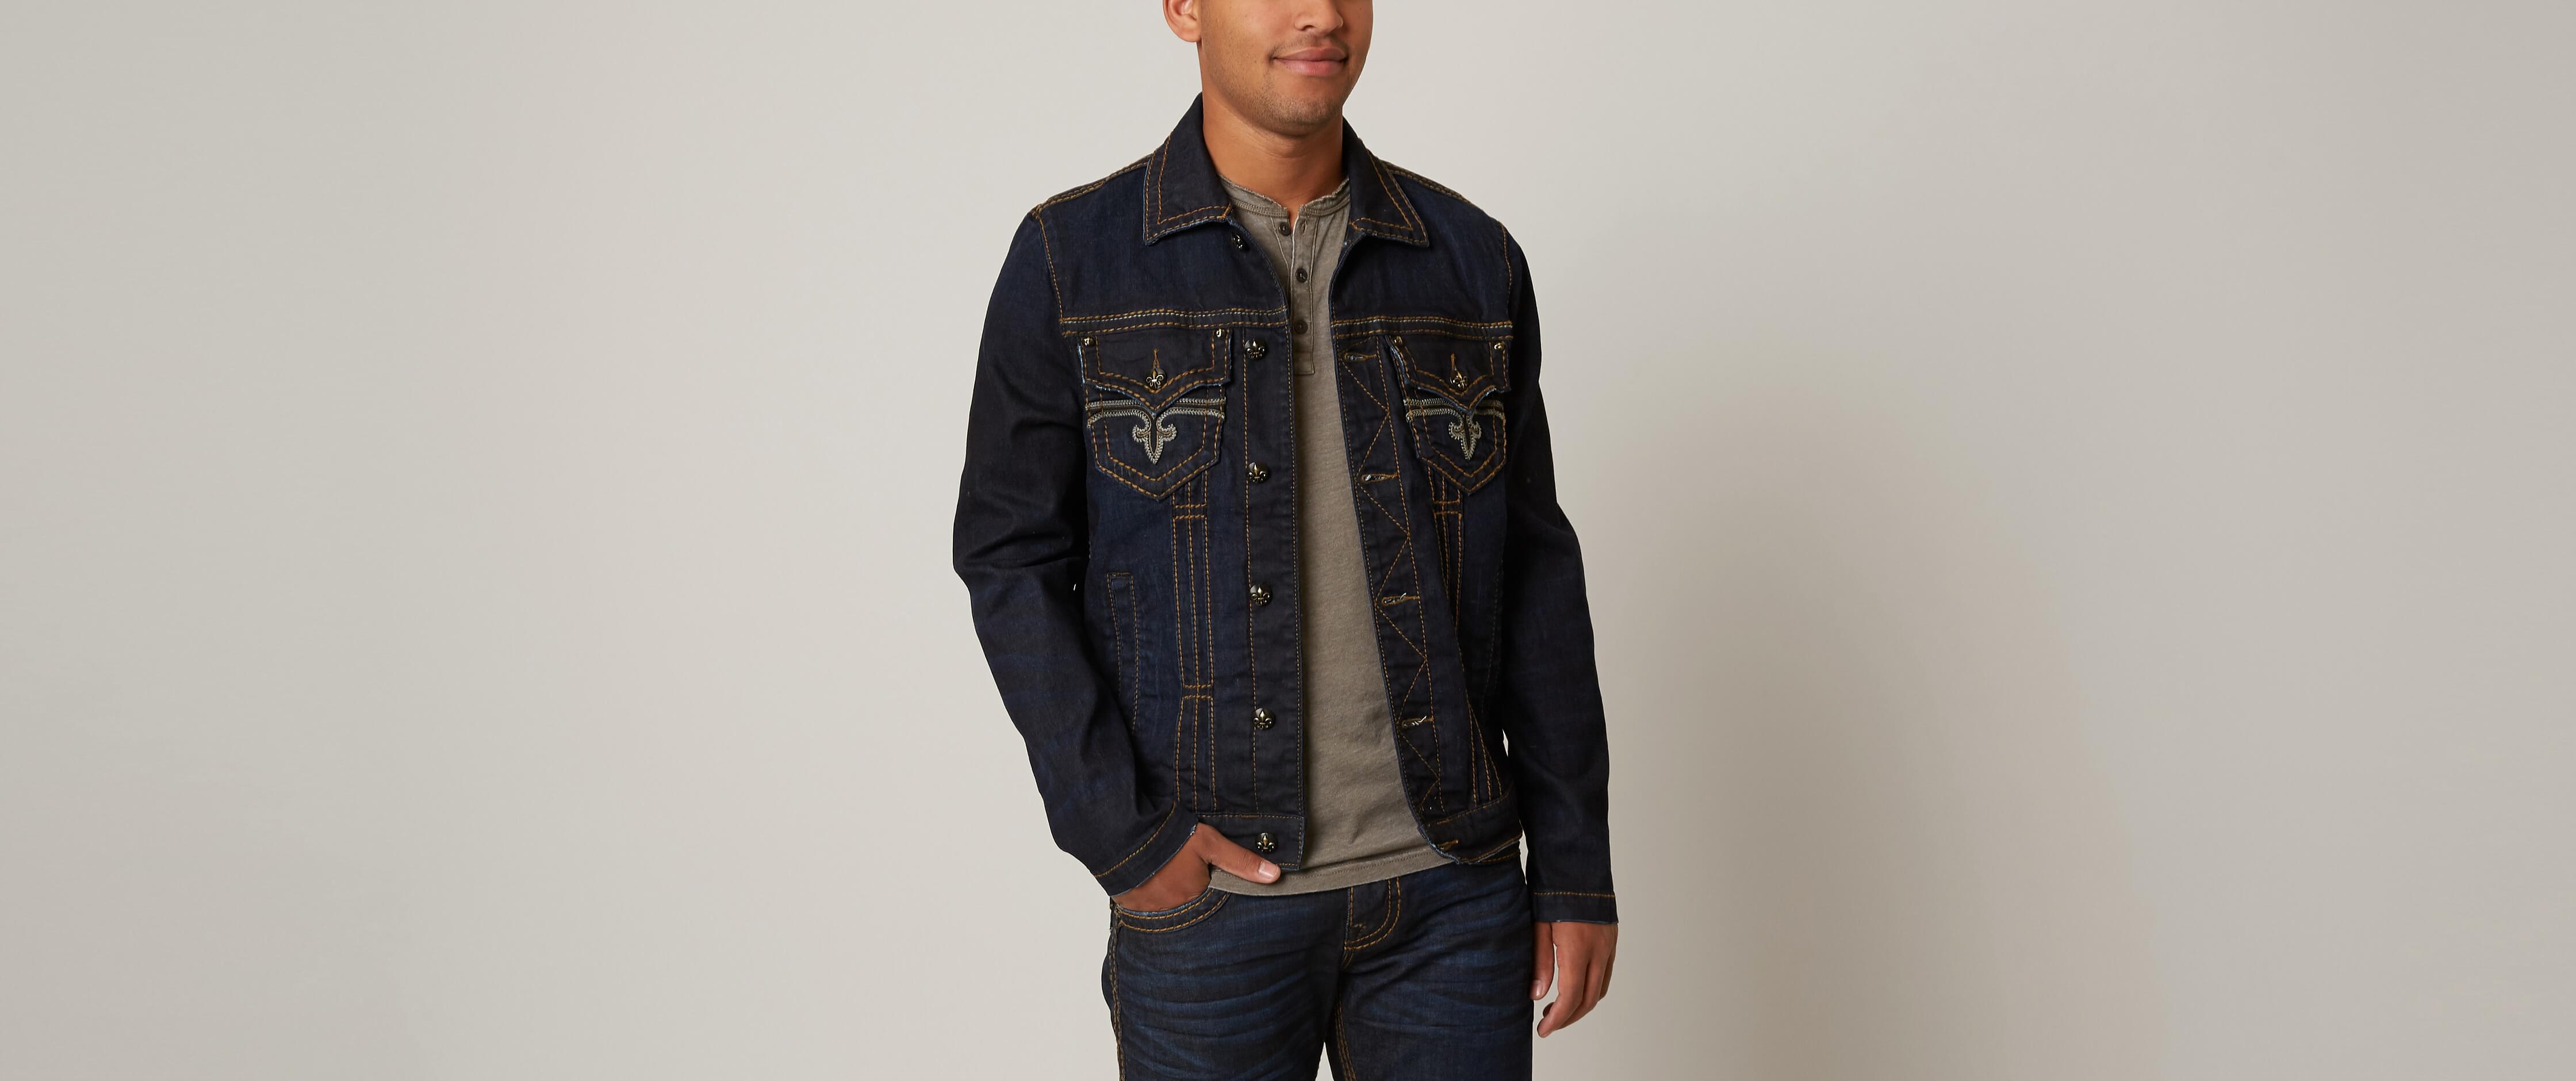 rock revival jean jacket outfit